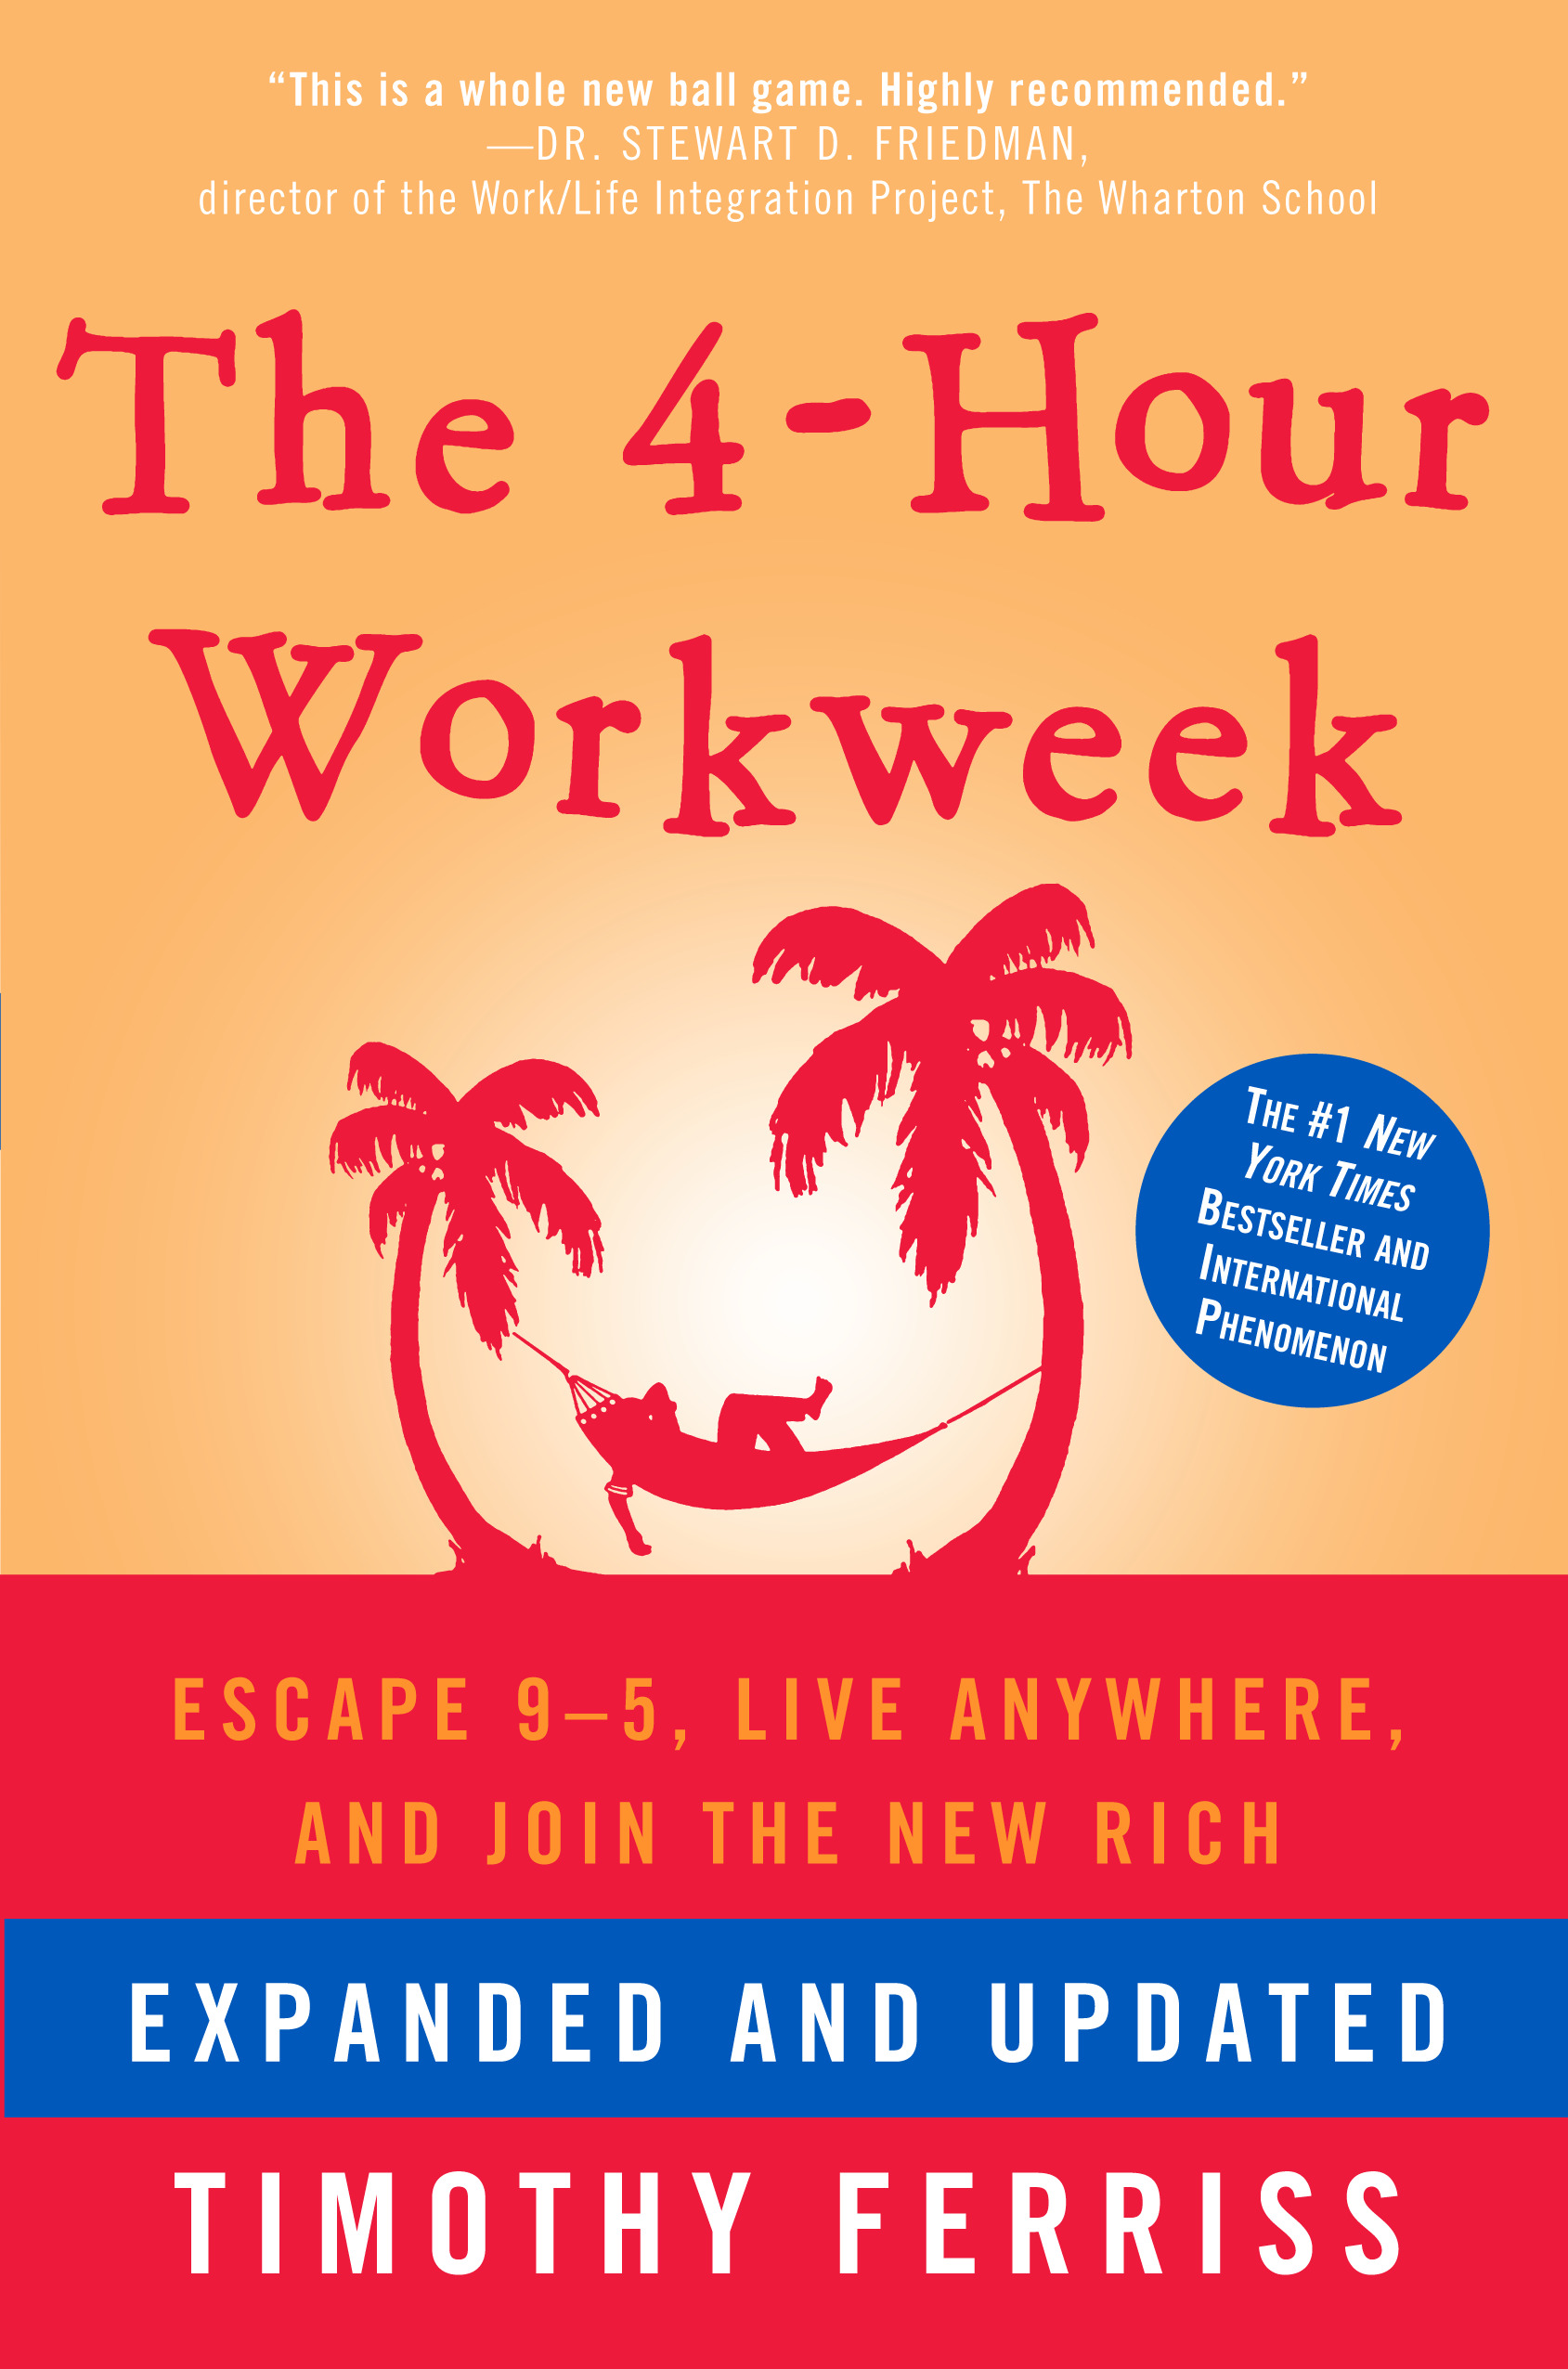 The 4-hour workweek and GetFriday